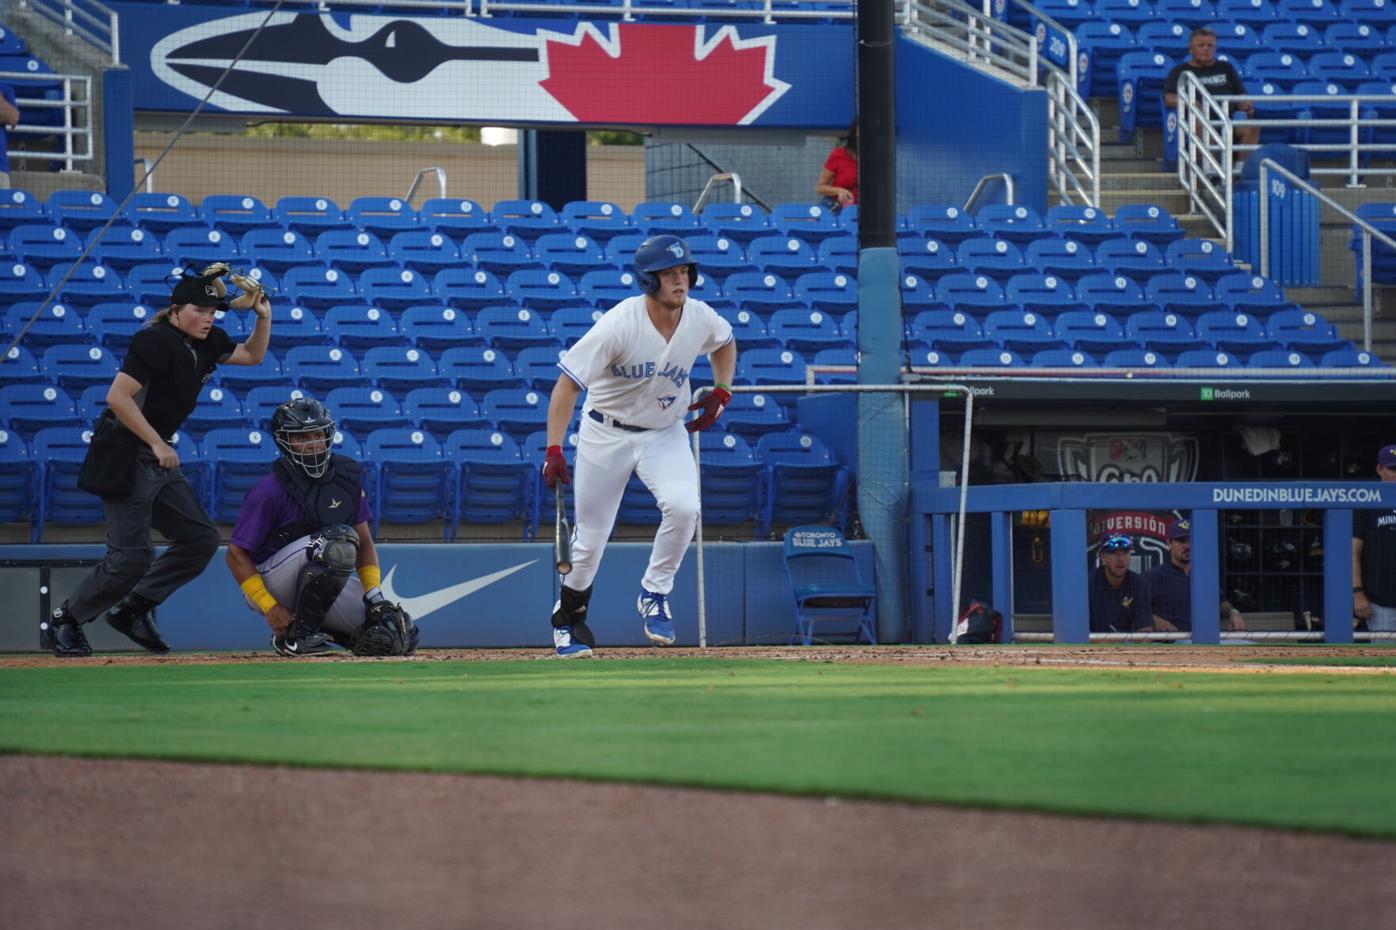 Wildwood's Orf works hard to move up in Toronto Blue Jays